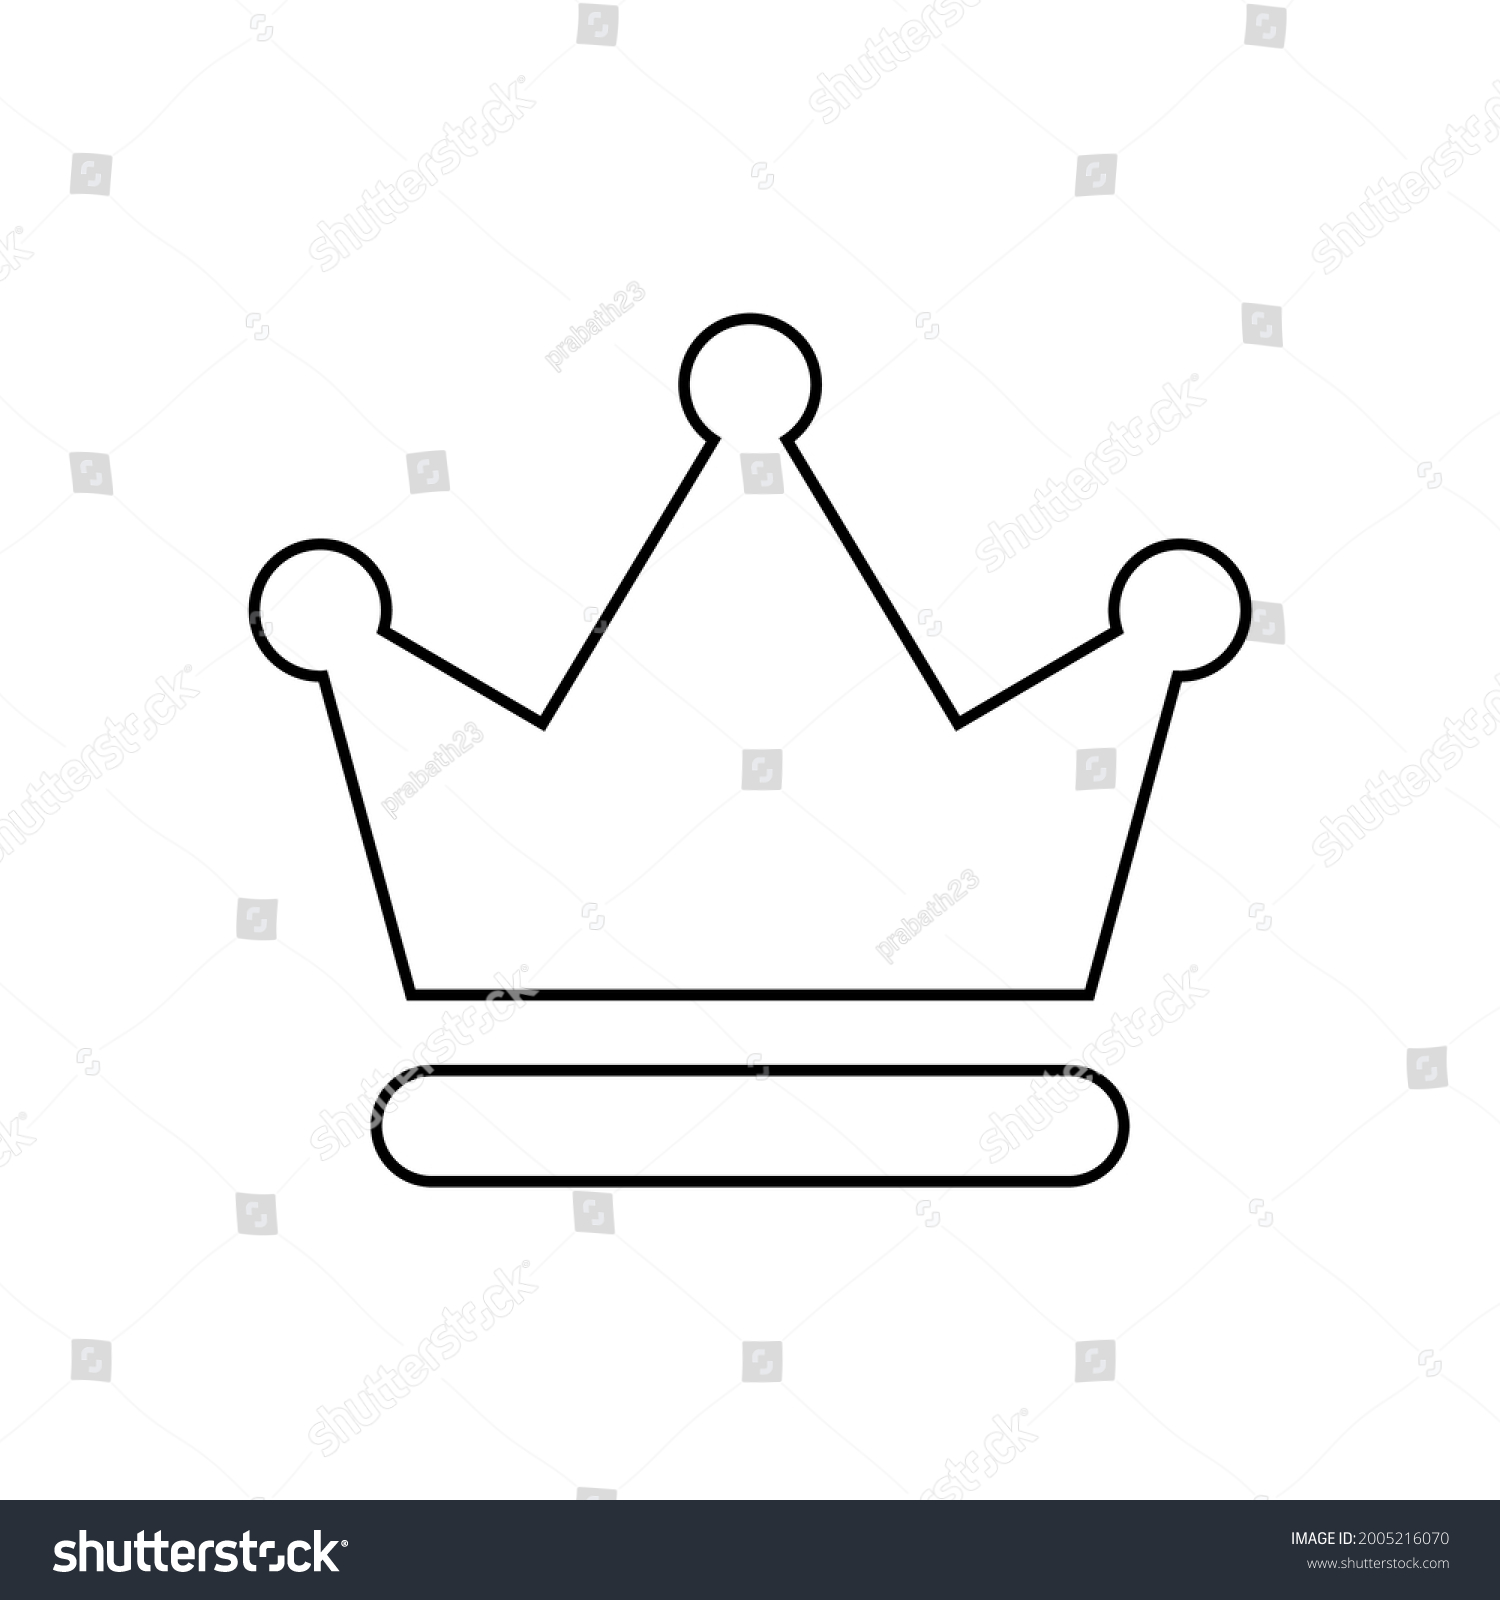 Crown Vector Isolated On White Background Stock Vector (Royalty Free ...